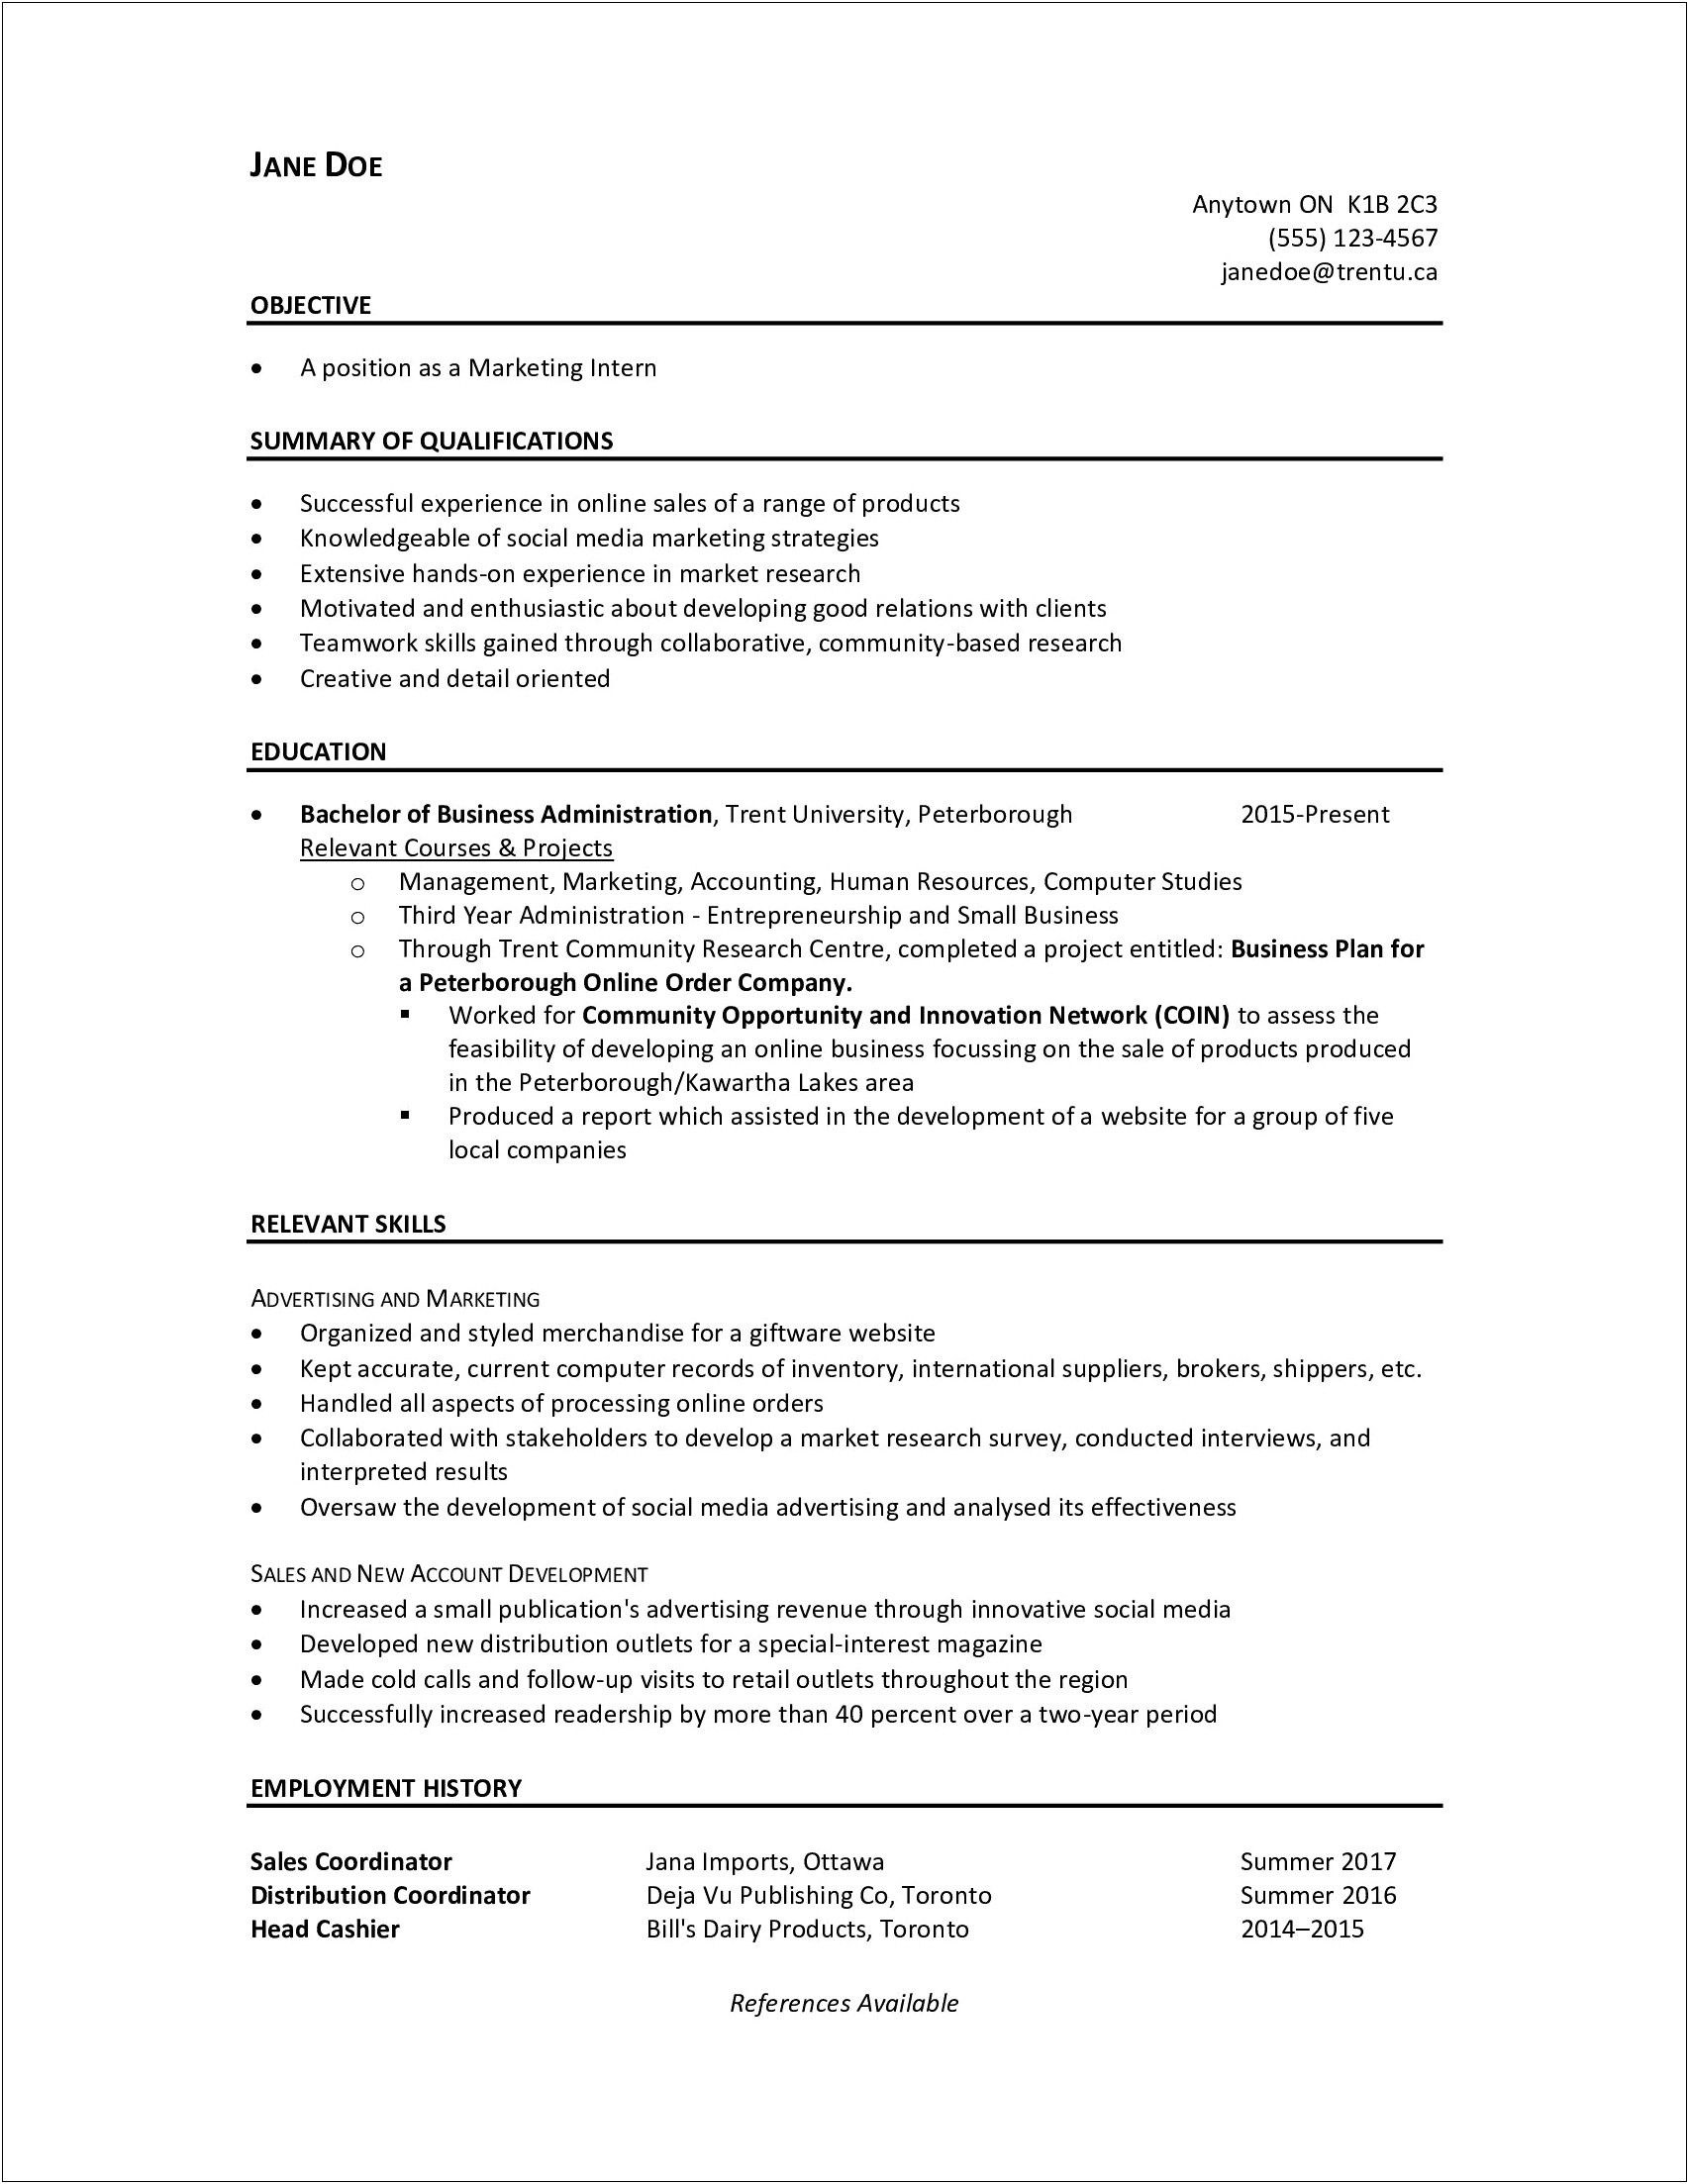 Action Based Skills For A Resume